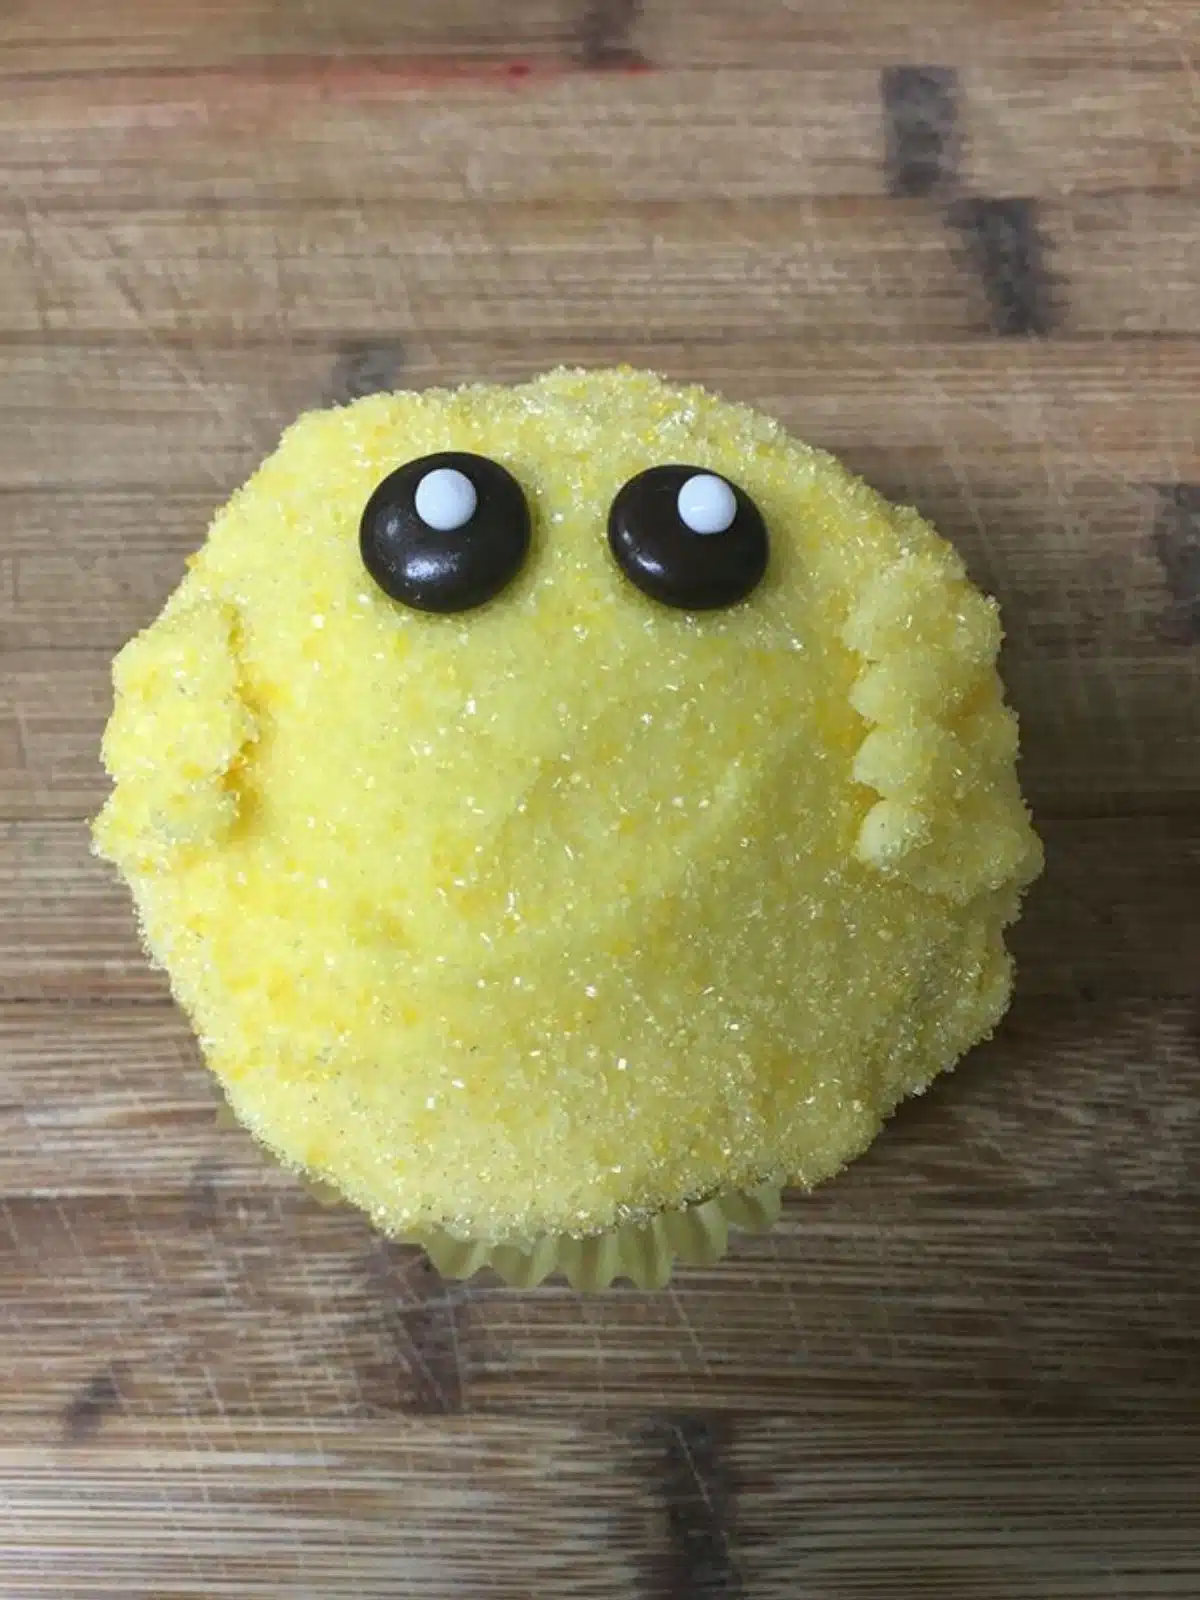 Chick cupcake decorated with black eyes.